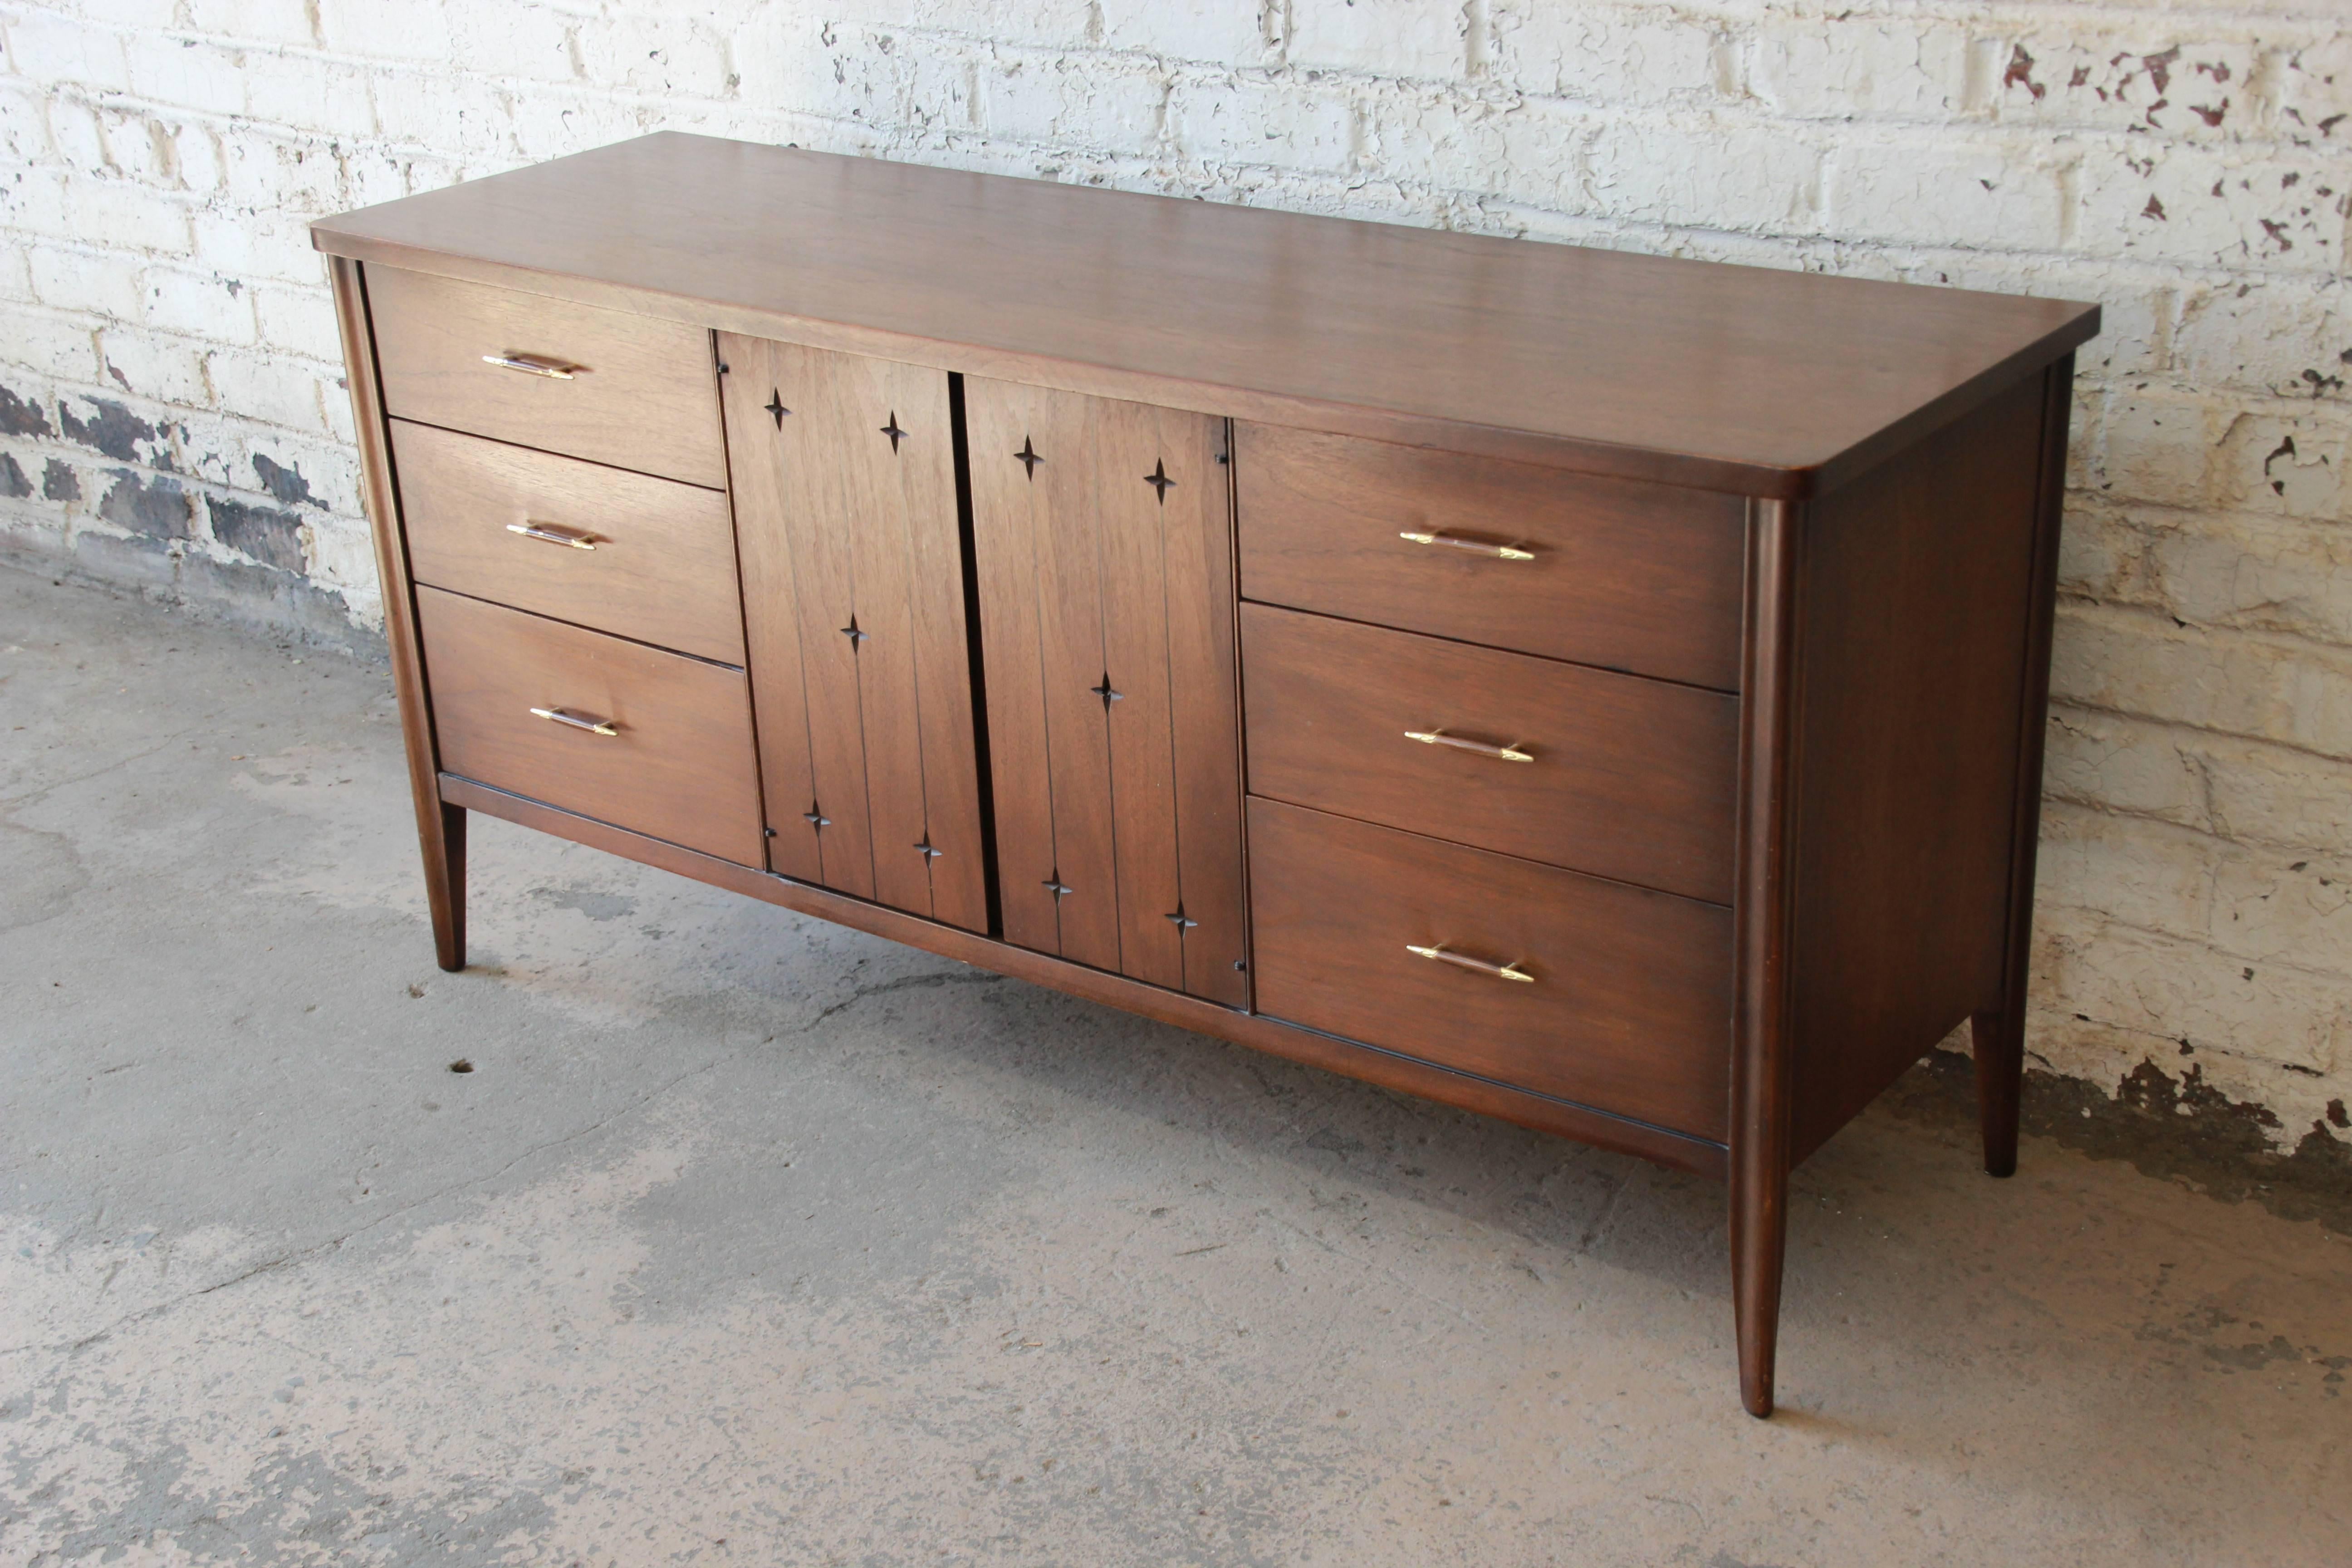 A very nice Mid-Century Modern sculpted walnut long triple dresser or credenza from the iconic 